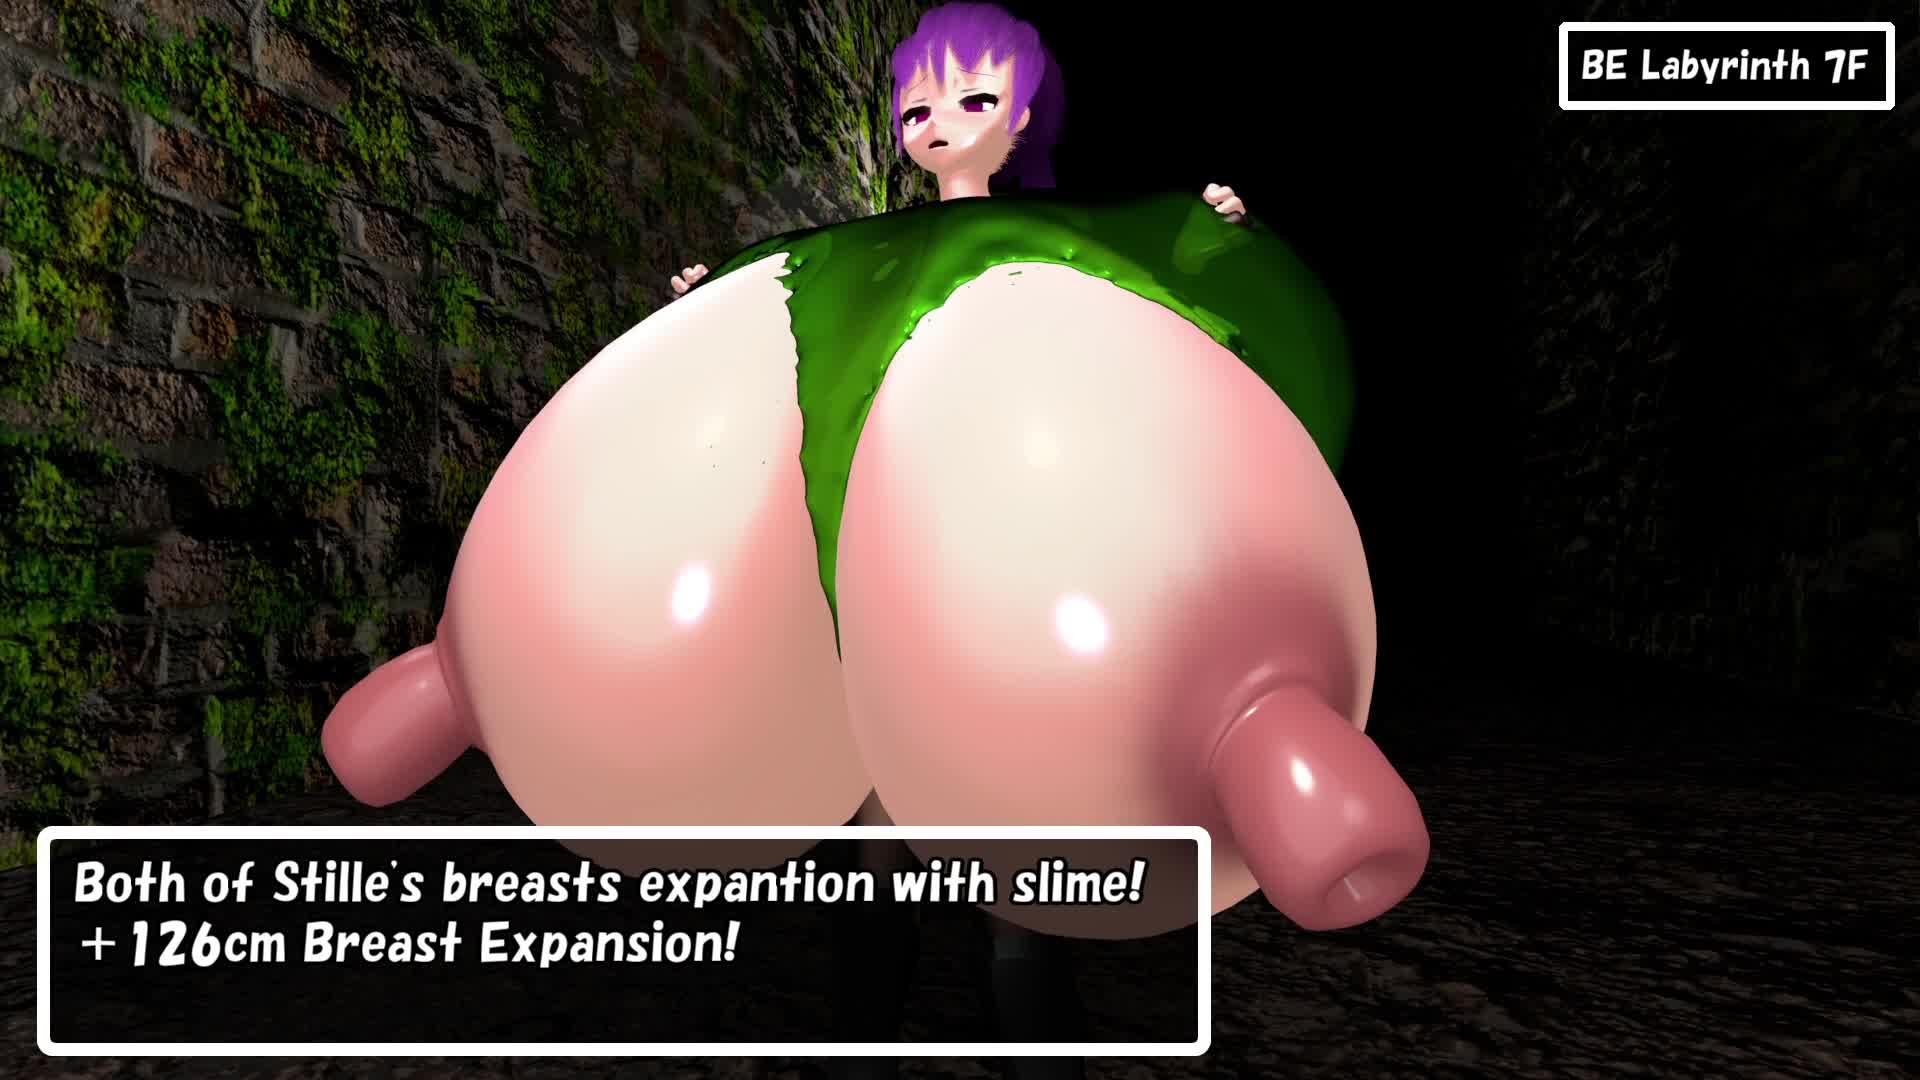 Breast expansion labyrinth